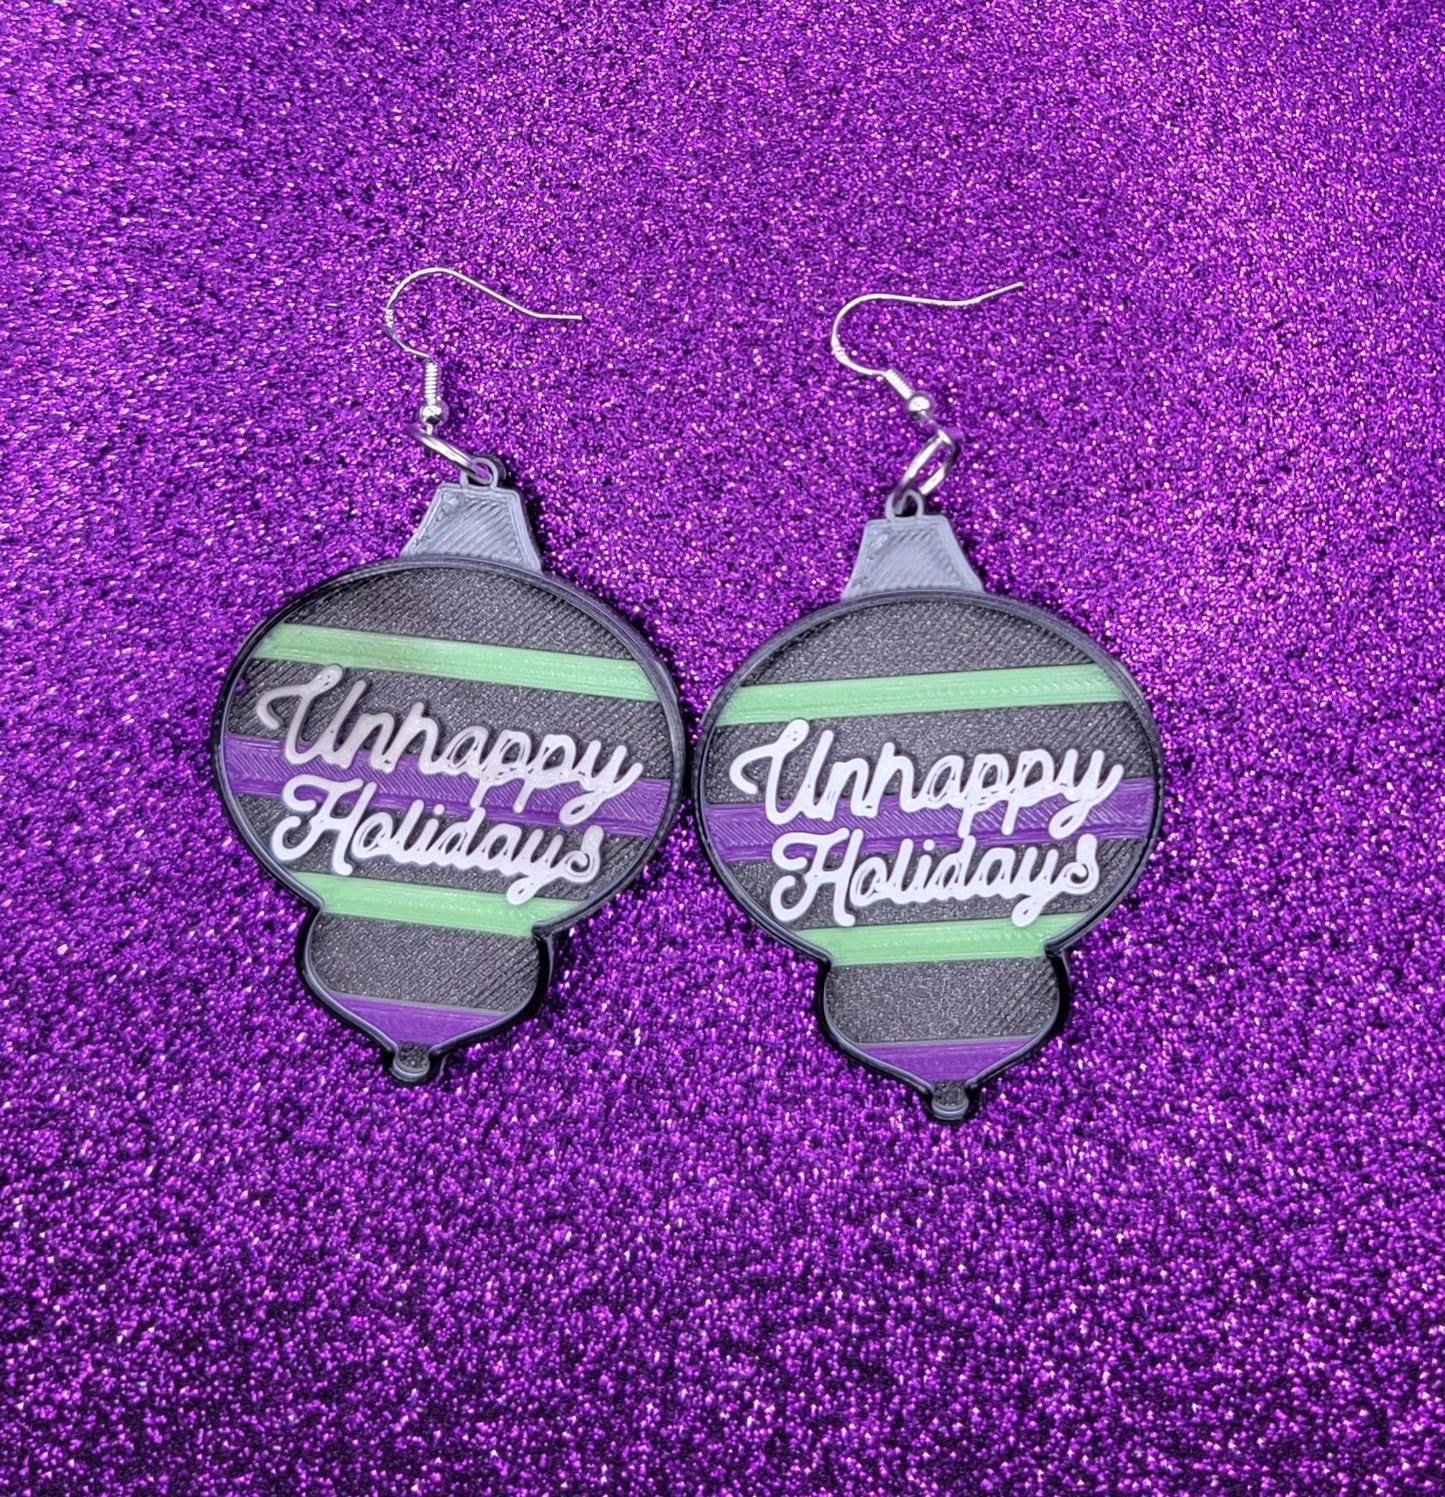 Unhappy Holidays Christmas Ornament Earrings 3D Printed Weird Earrings, Unique Earrings, Edgy Earrings, Drop Earrings, Alternative Earrings